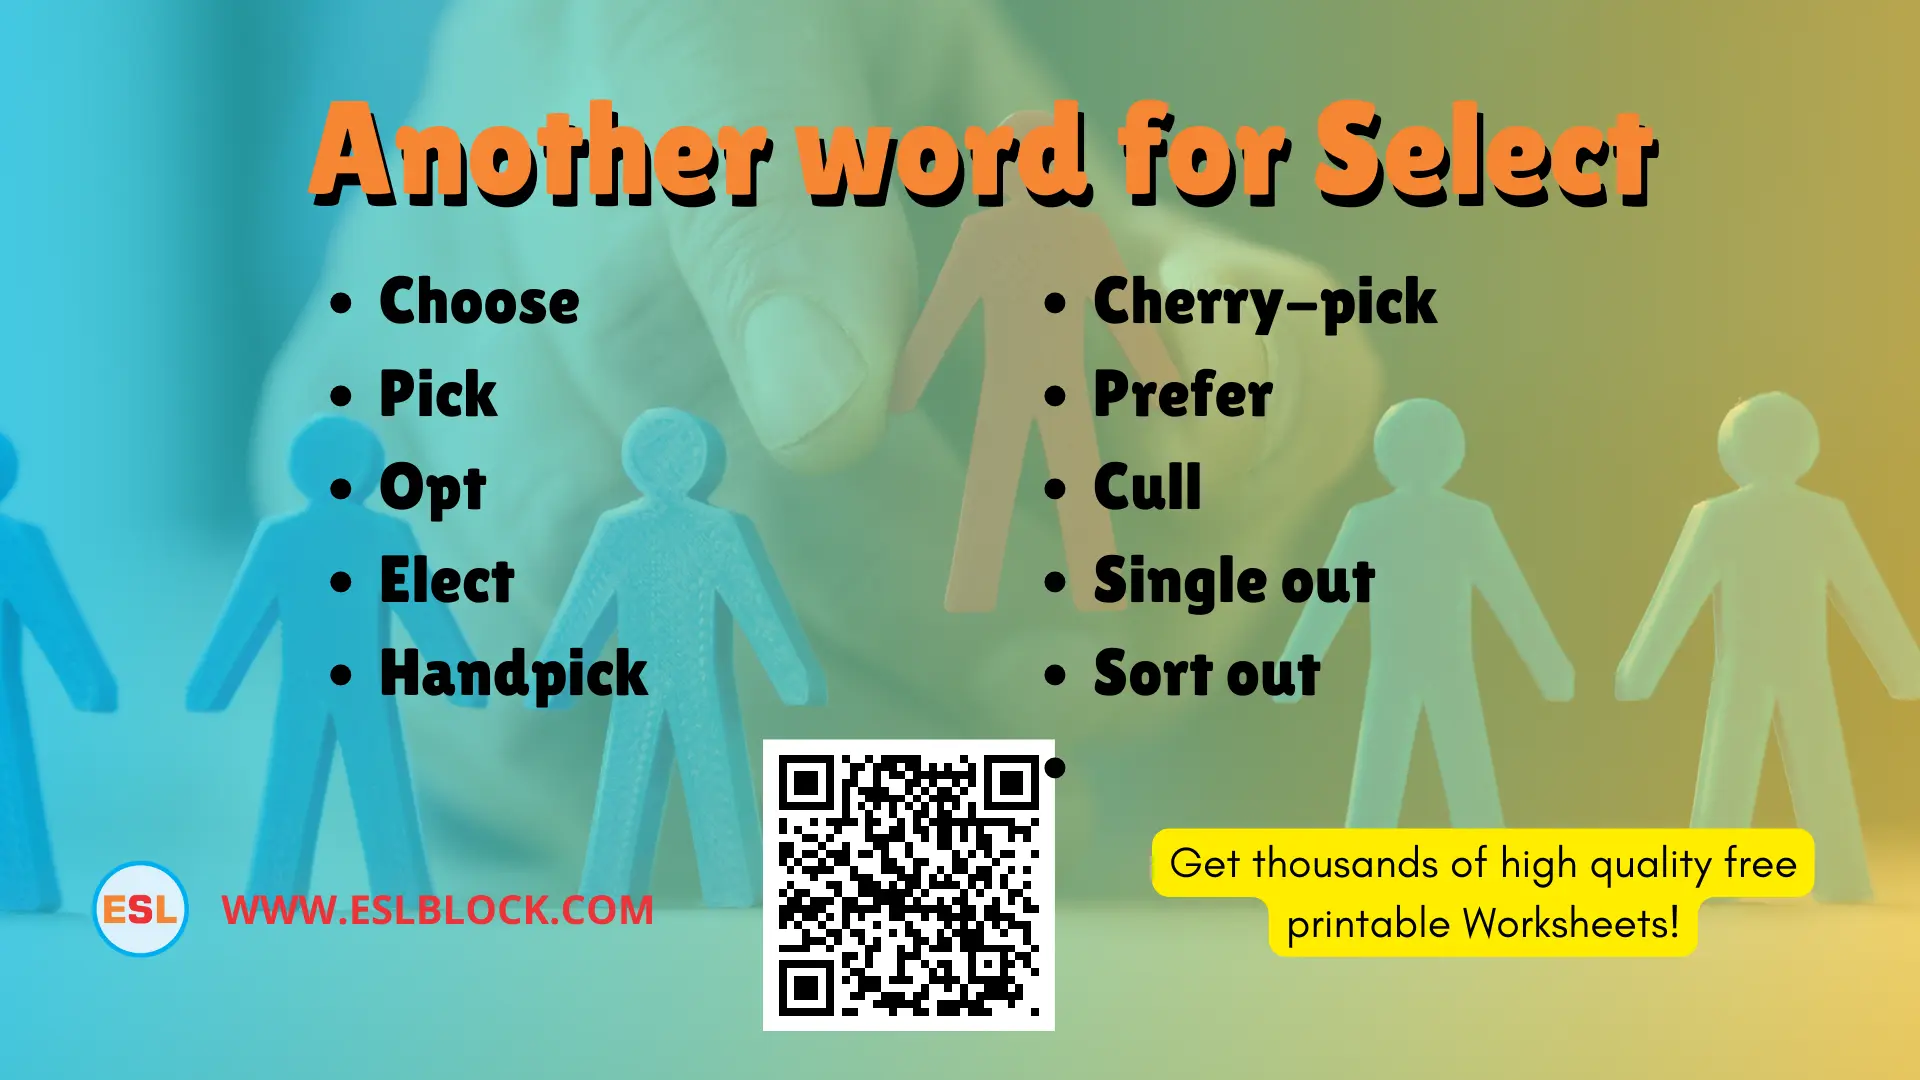 _What is another word for Select